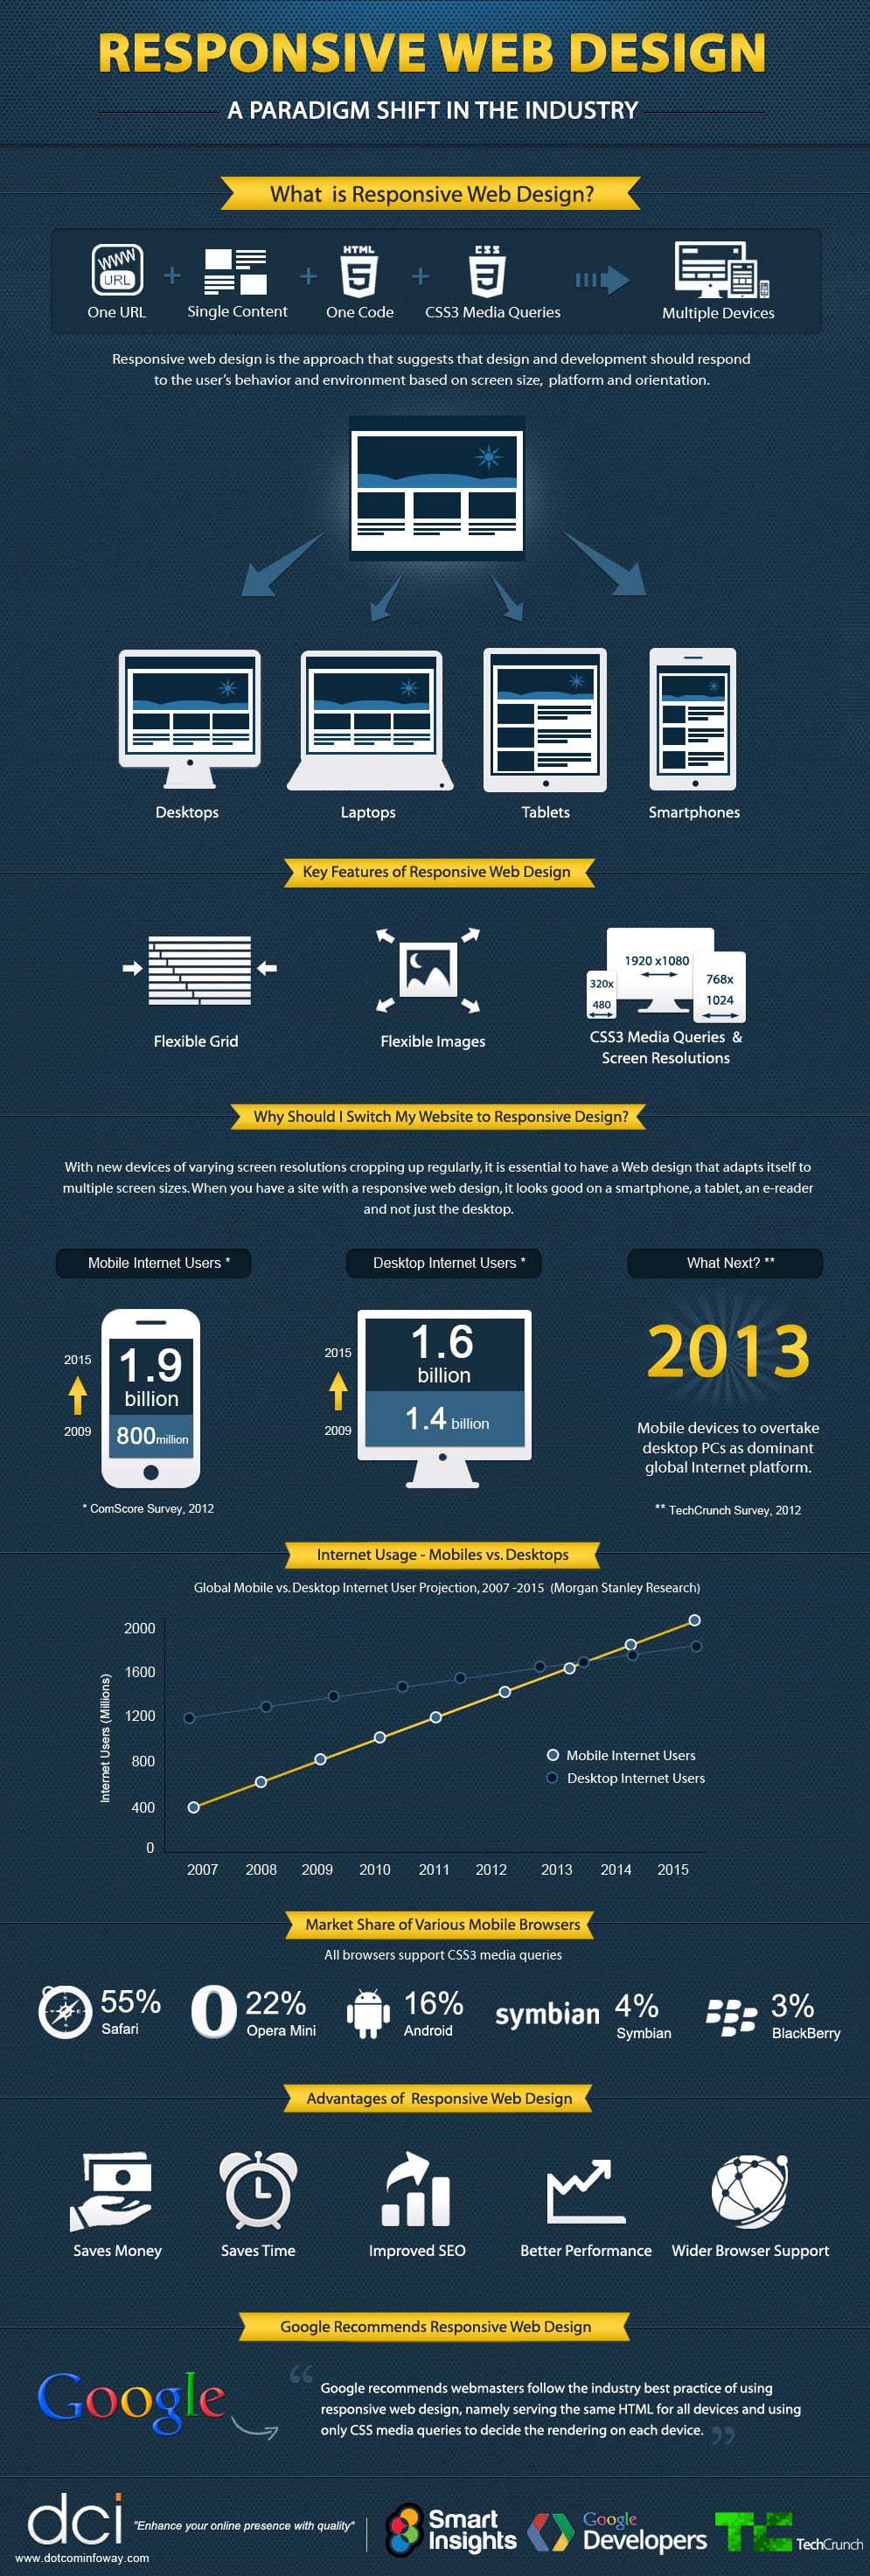 Top 7 Reasons Why You Should Consider Responsive Web Design